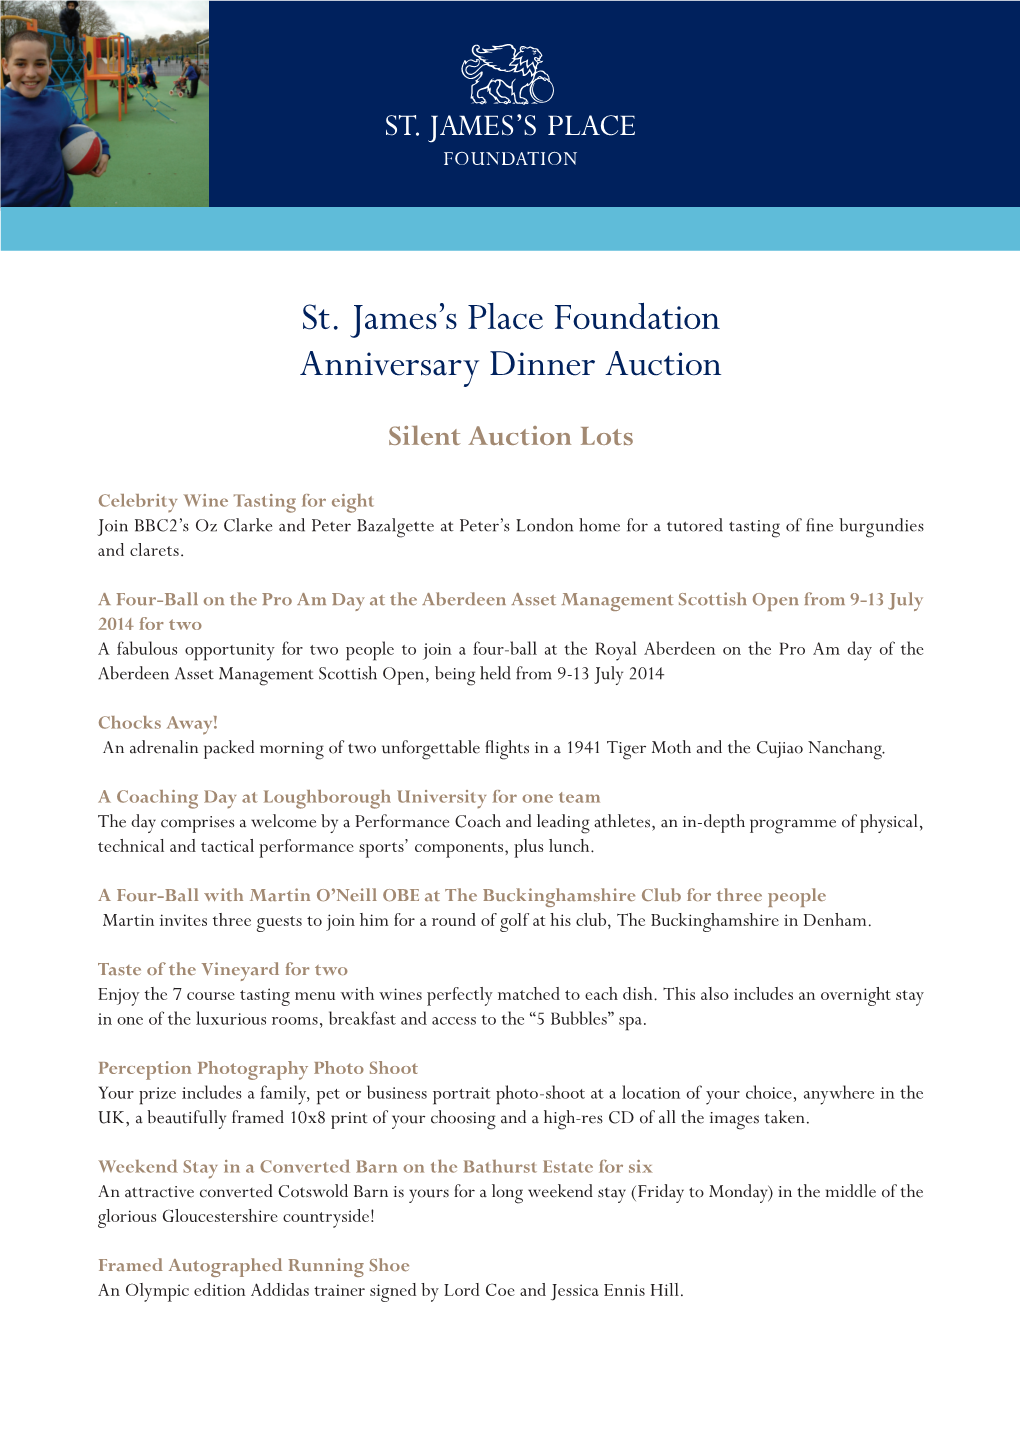 St. James's Place Foundation Anniversary Dinner Auction